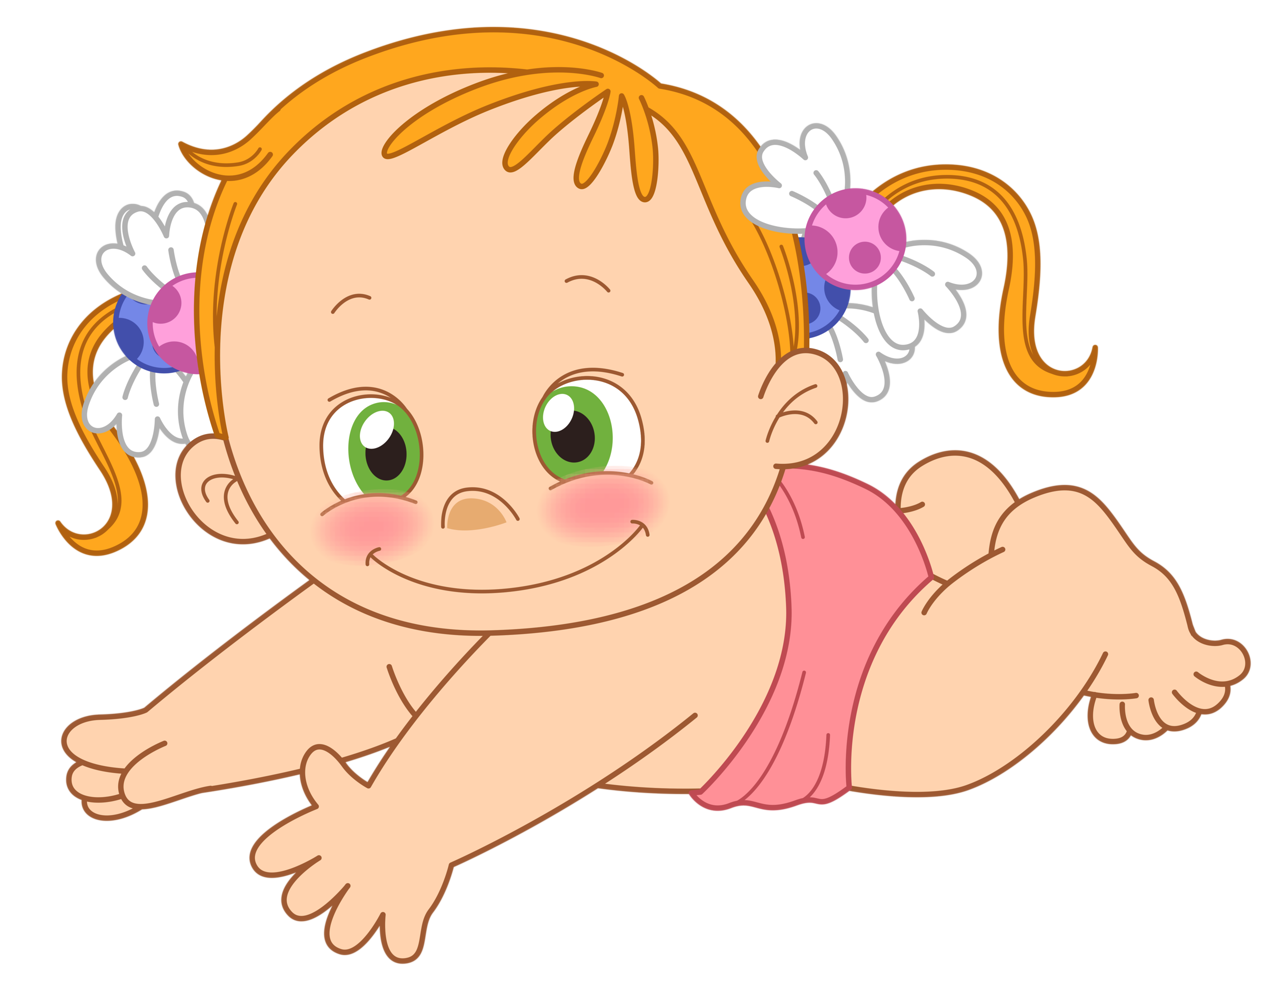  png pinterest babies. Growth clipart baby